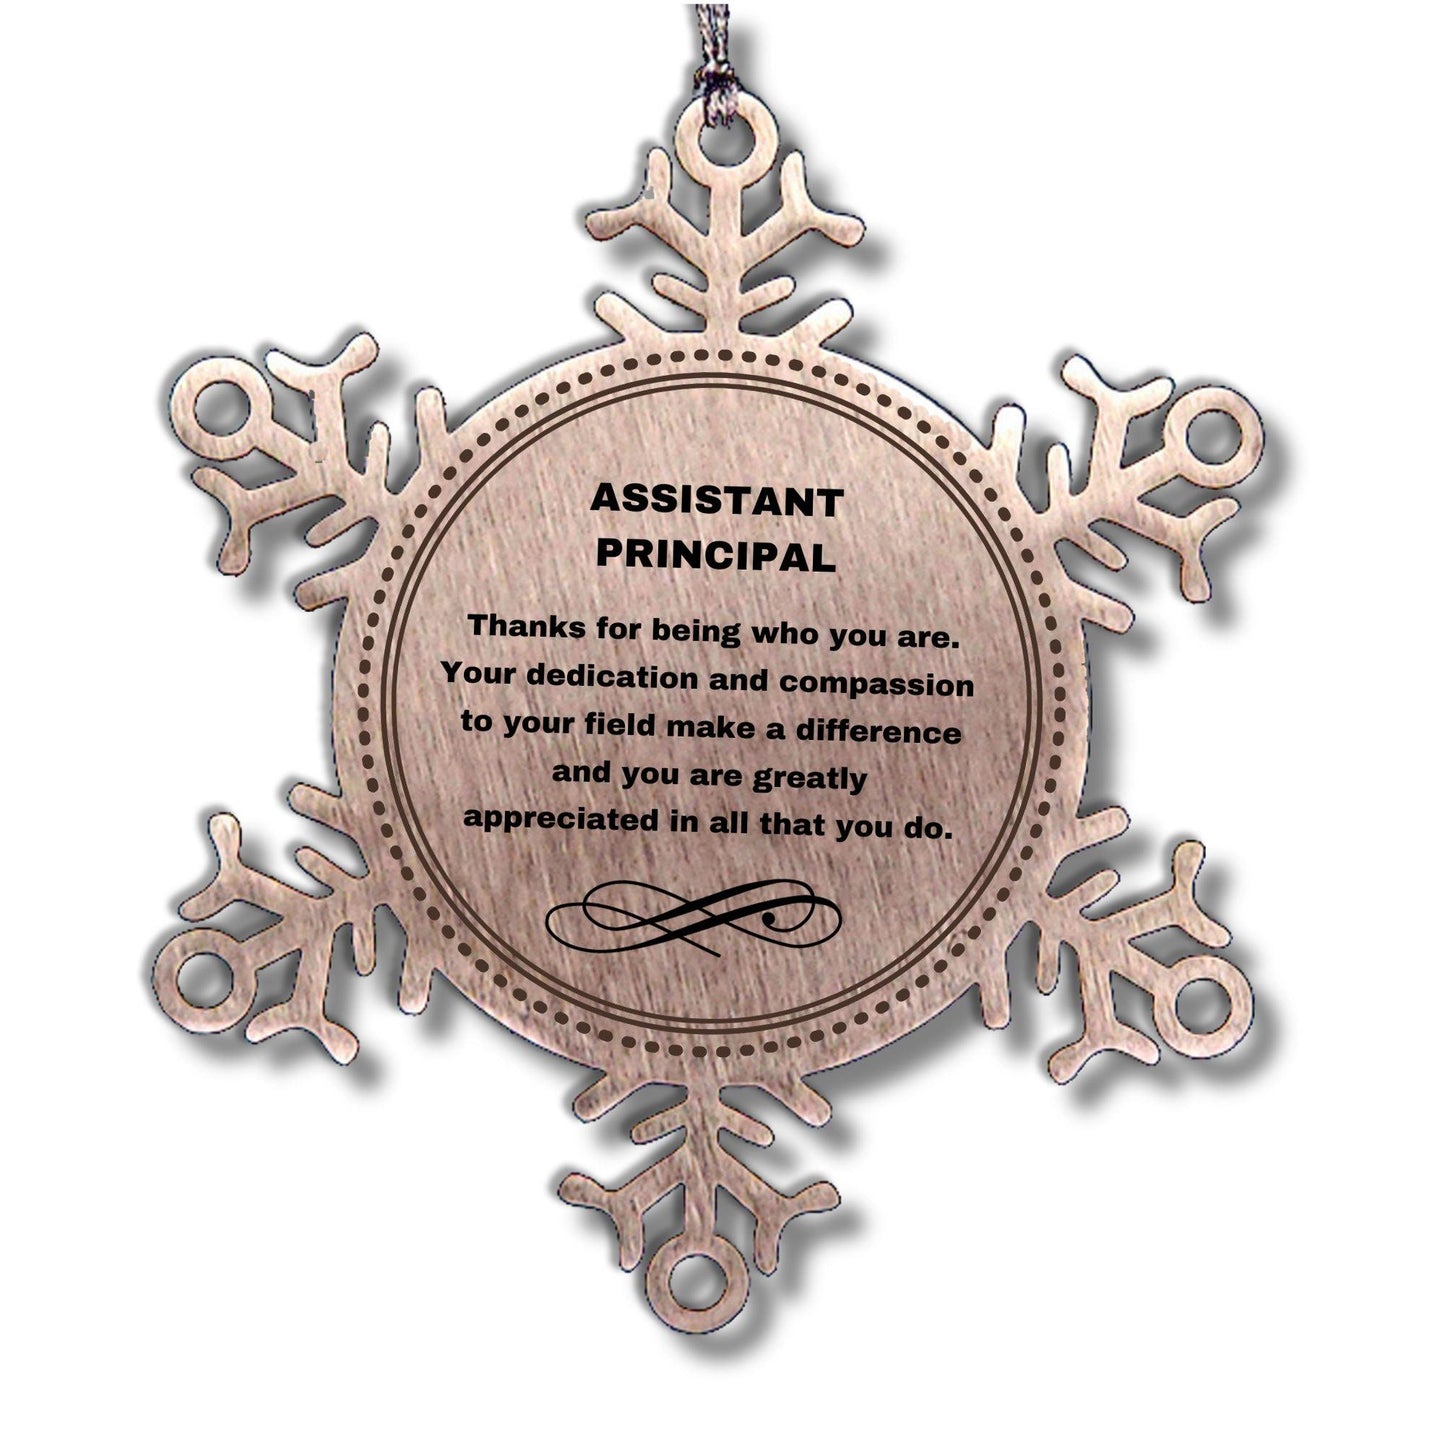 Assistant Principal Snowflake Ornament - Thanks for being who you are - Birthday Christmas Tree Gifts Coworkers Colleague Boss - Mallard Moon Gift Shop